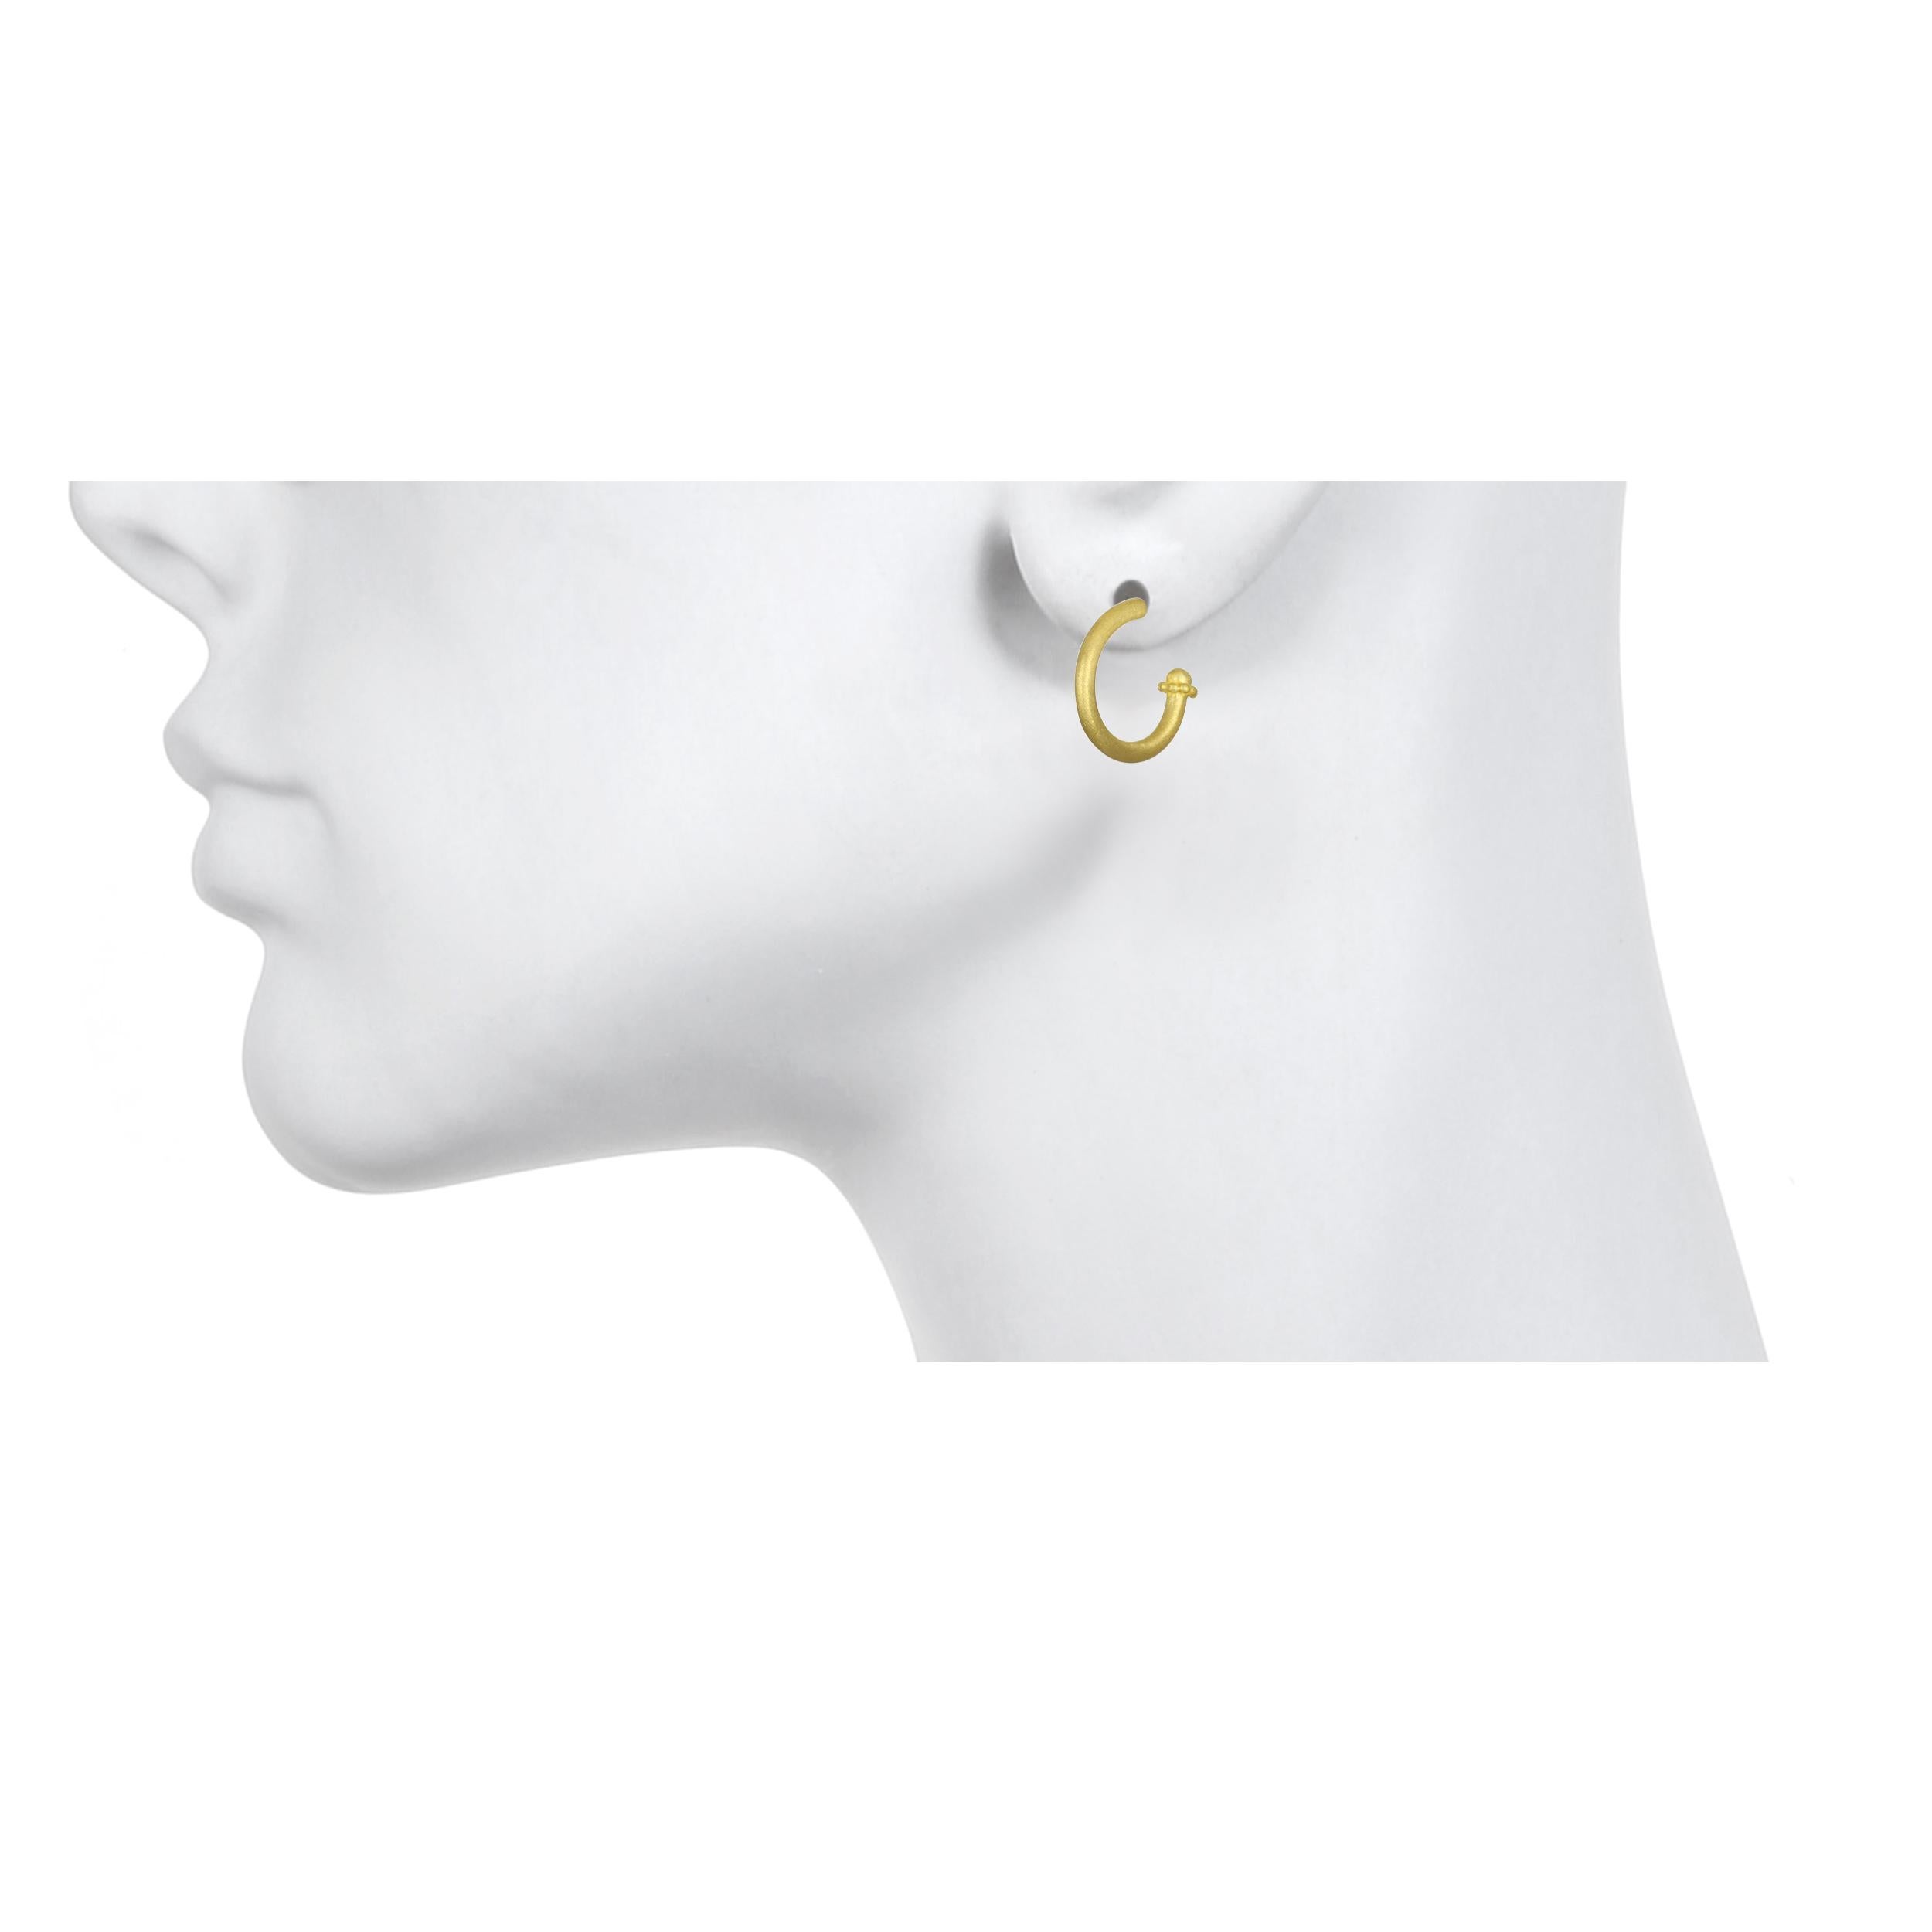 Handcrafted in 18k gold, Faye Kim’s modern post hoop design conveys understated elegance and a truly stylish, everyday look. Solid with a matte finish and post backs, these hoops are easy to wear and can be dressed up with a variety of drops.